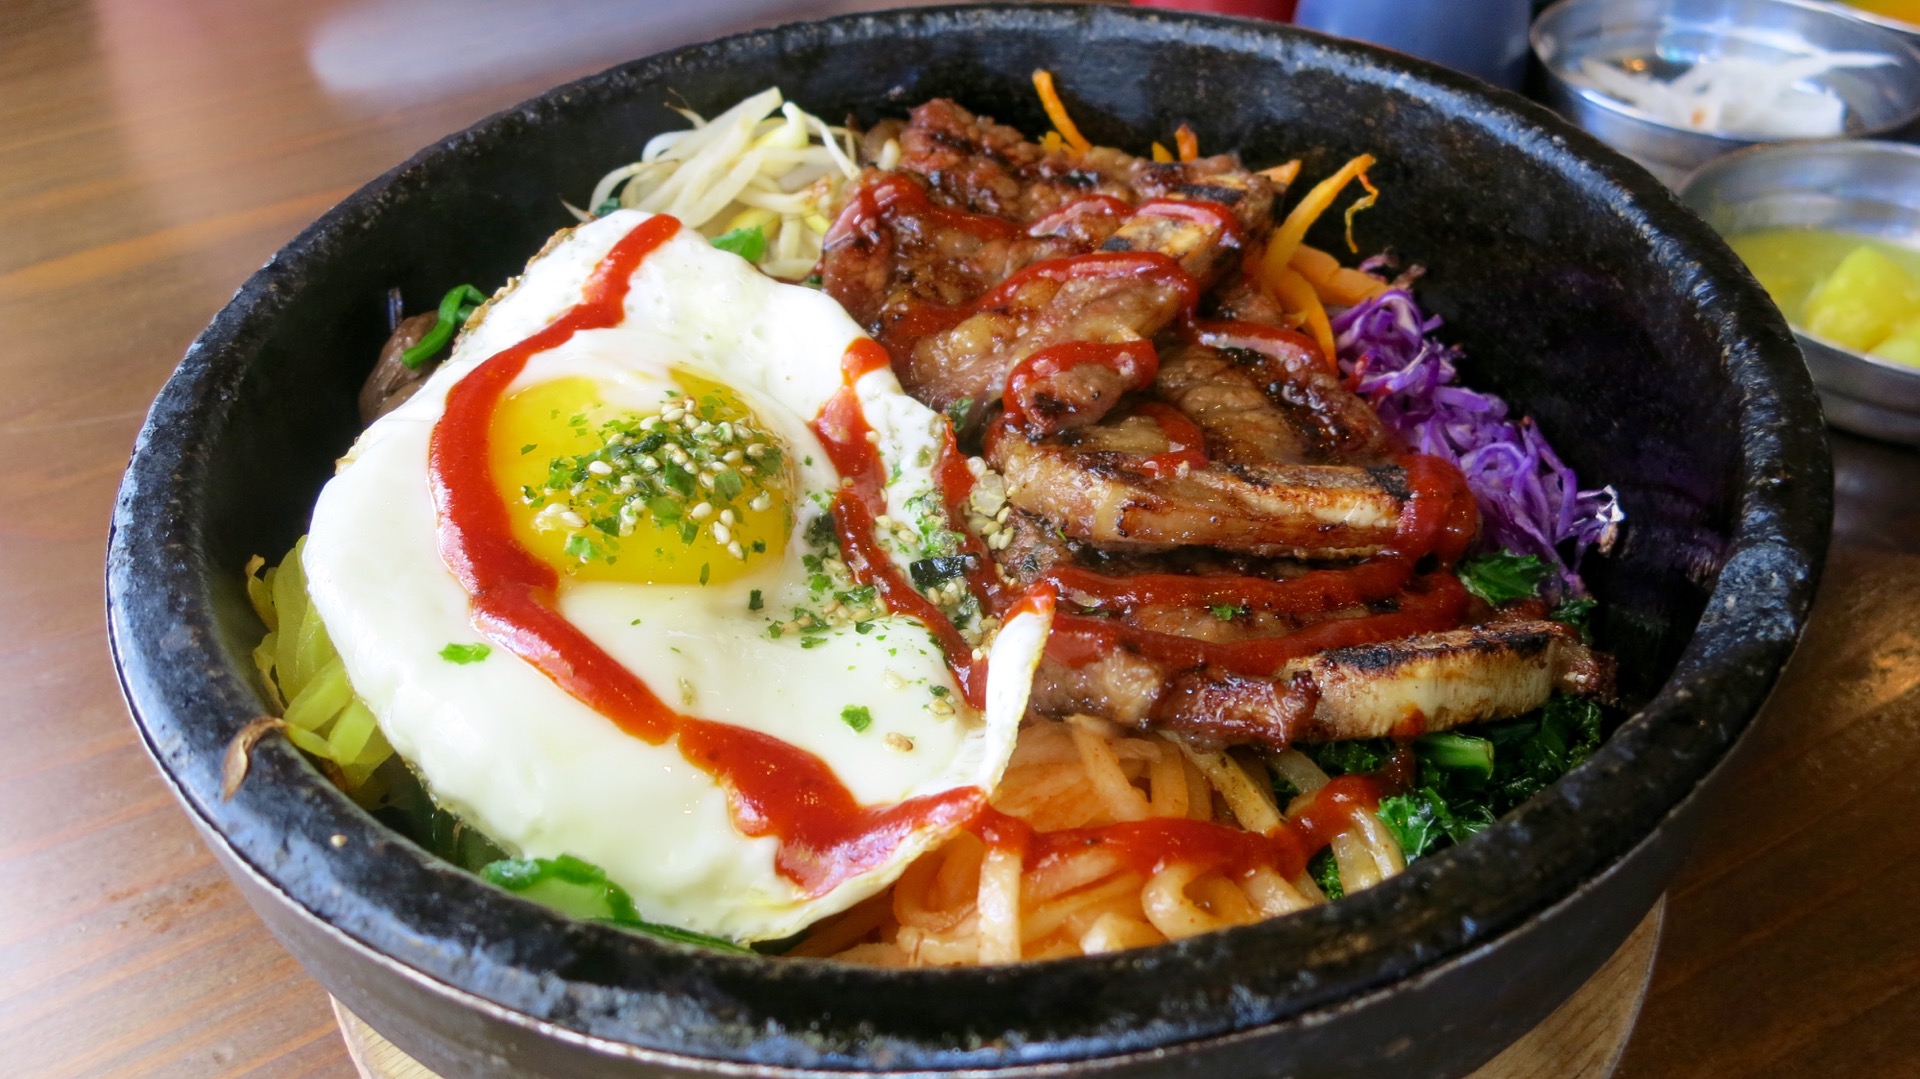 A symphony of sounds and flavors come with the sizzling dol sot bi bim bap at Bowl'd.